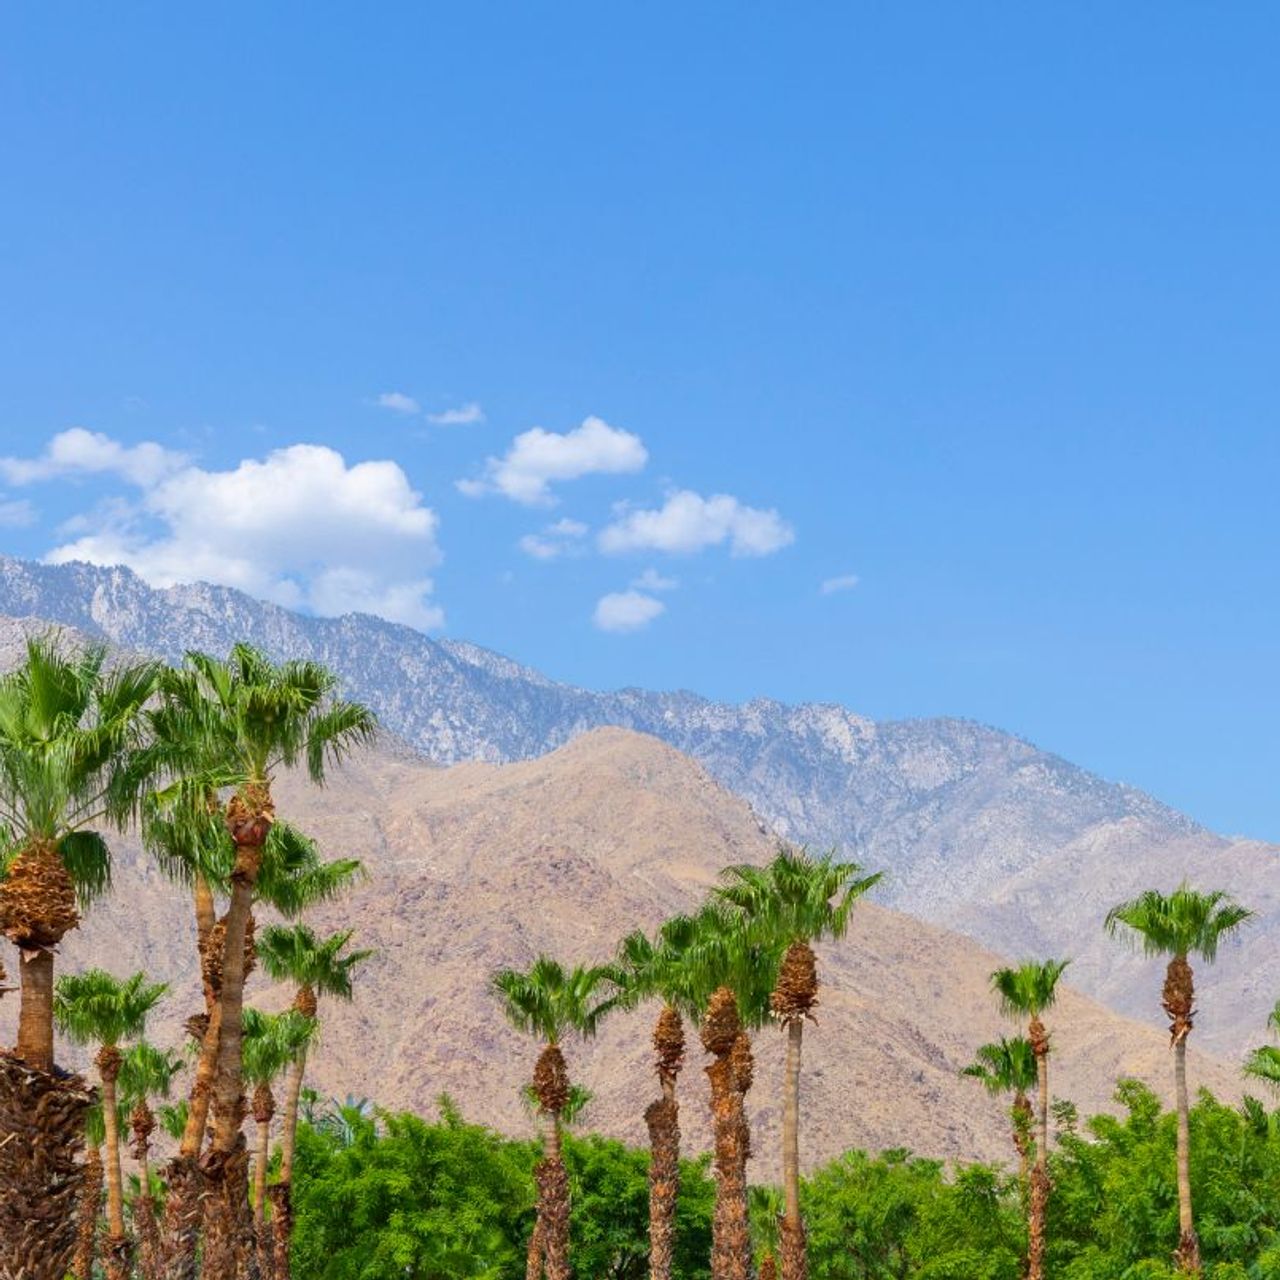 Palm Springs California: Where to Stay, Where to Eat and What to Do